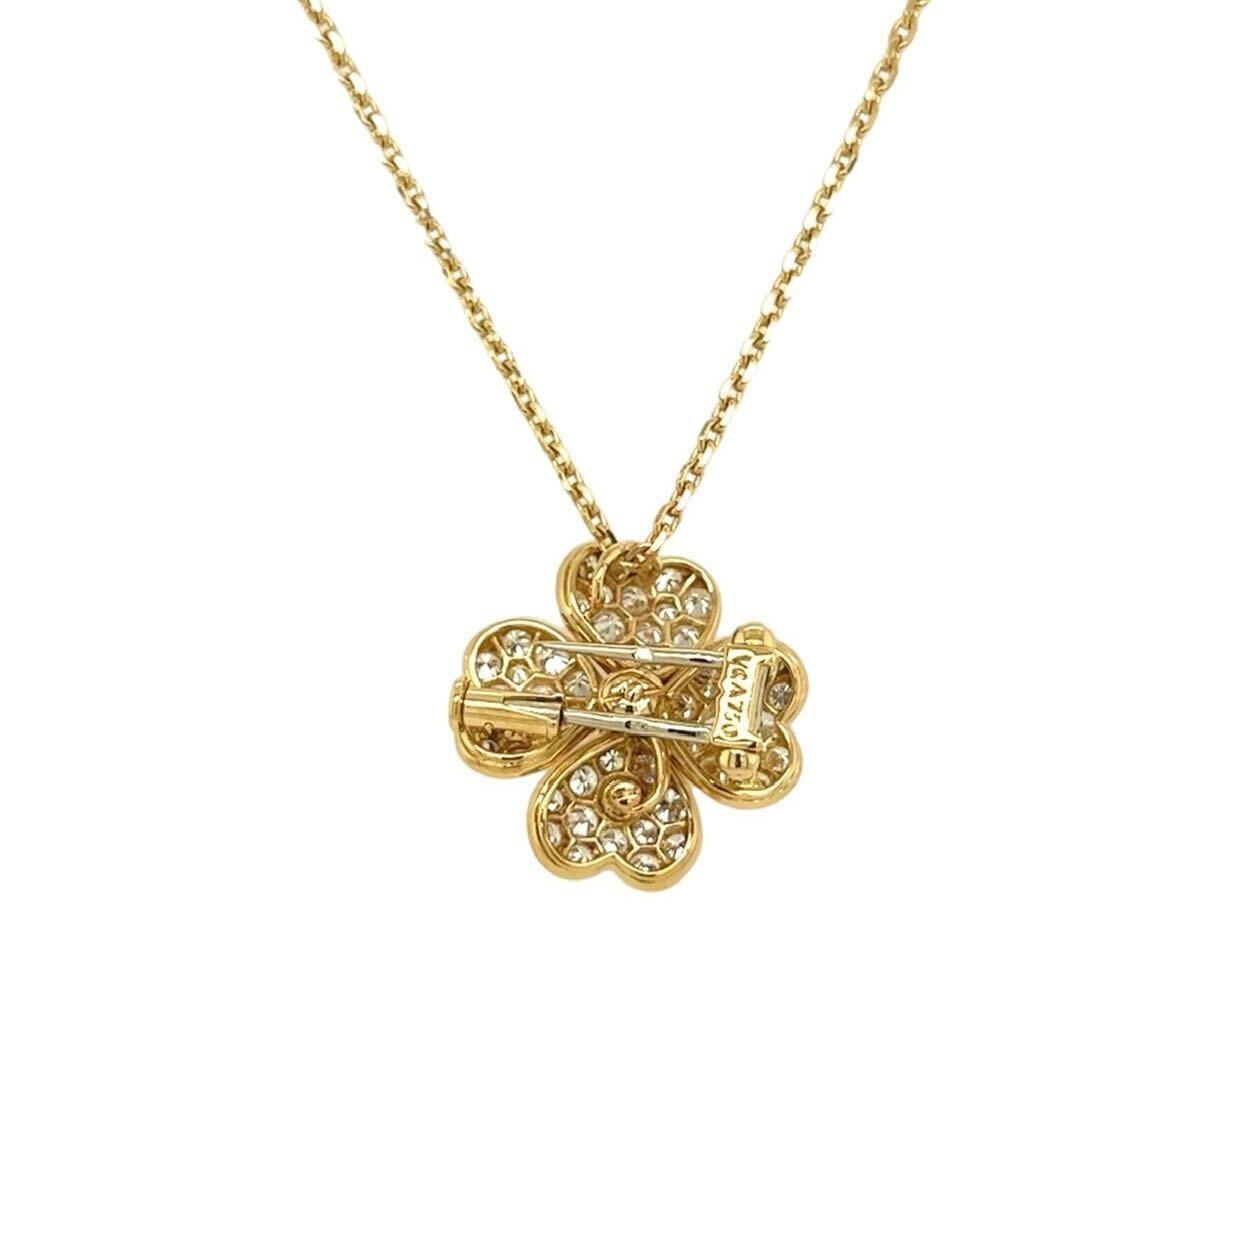 An 18 karat yellow gold and diamond necklace, Van Cleef & Arpels.  The “Cosmos” necklace designed as a fine cable chain suspending a pendant/brooch of a four petaled flower the petals pave set with approximately fifty two (52) round brilliant cut